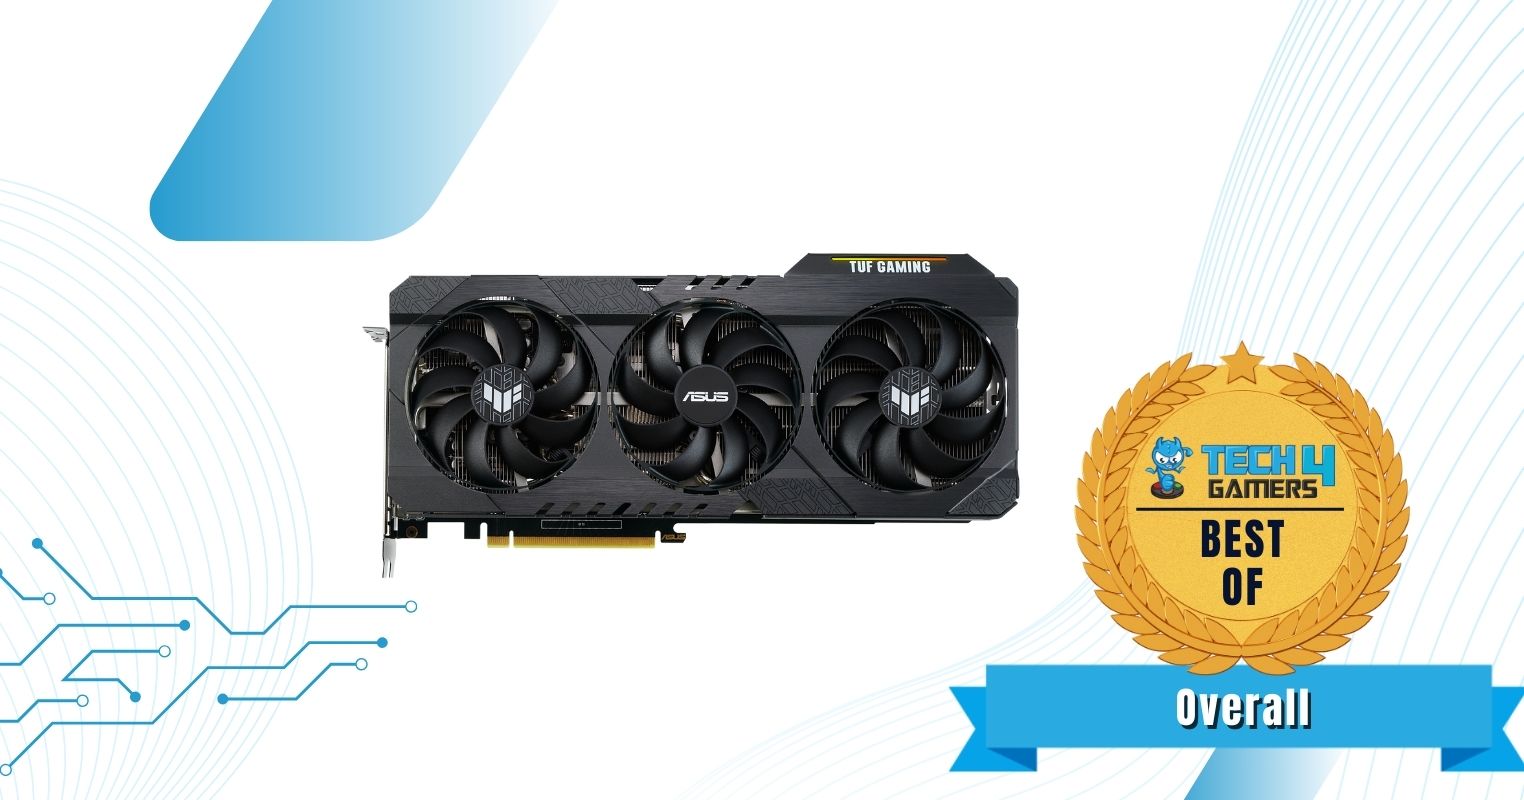 Best Overall GeForce RTX 3060 Ti - ASUS TUF Gaming NVIDIA GeForce RTX 3060 Ti V2 OC